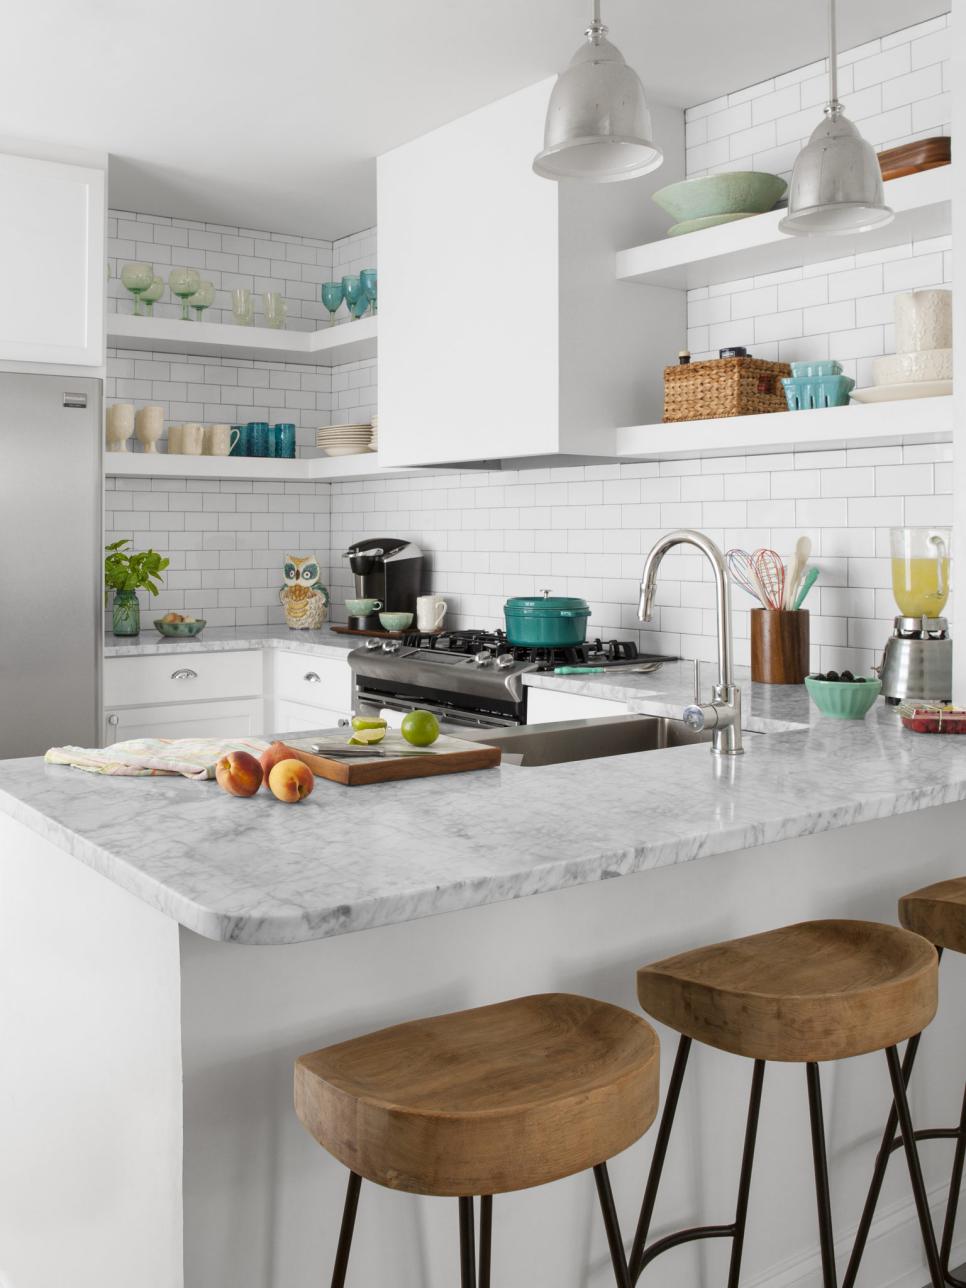 Home Decorating Inspiration From Beautiful White Kitchens ...